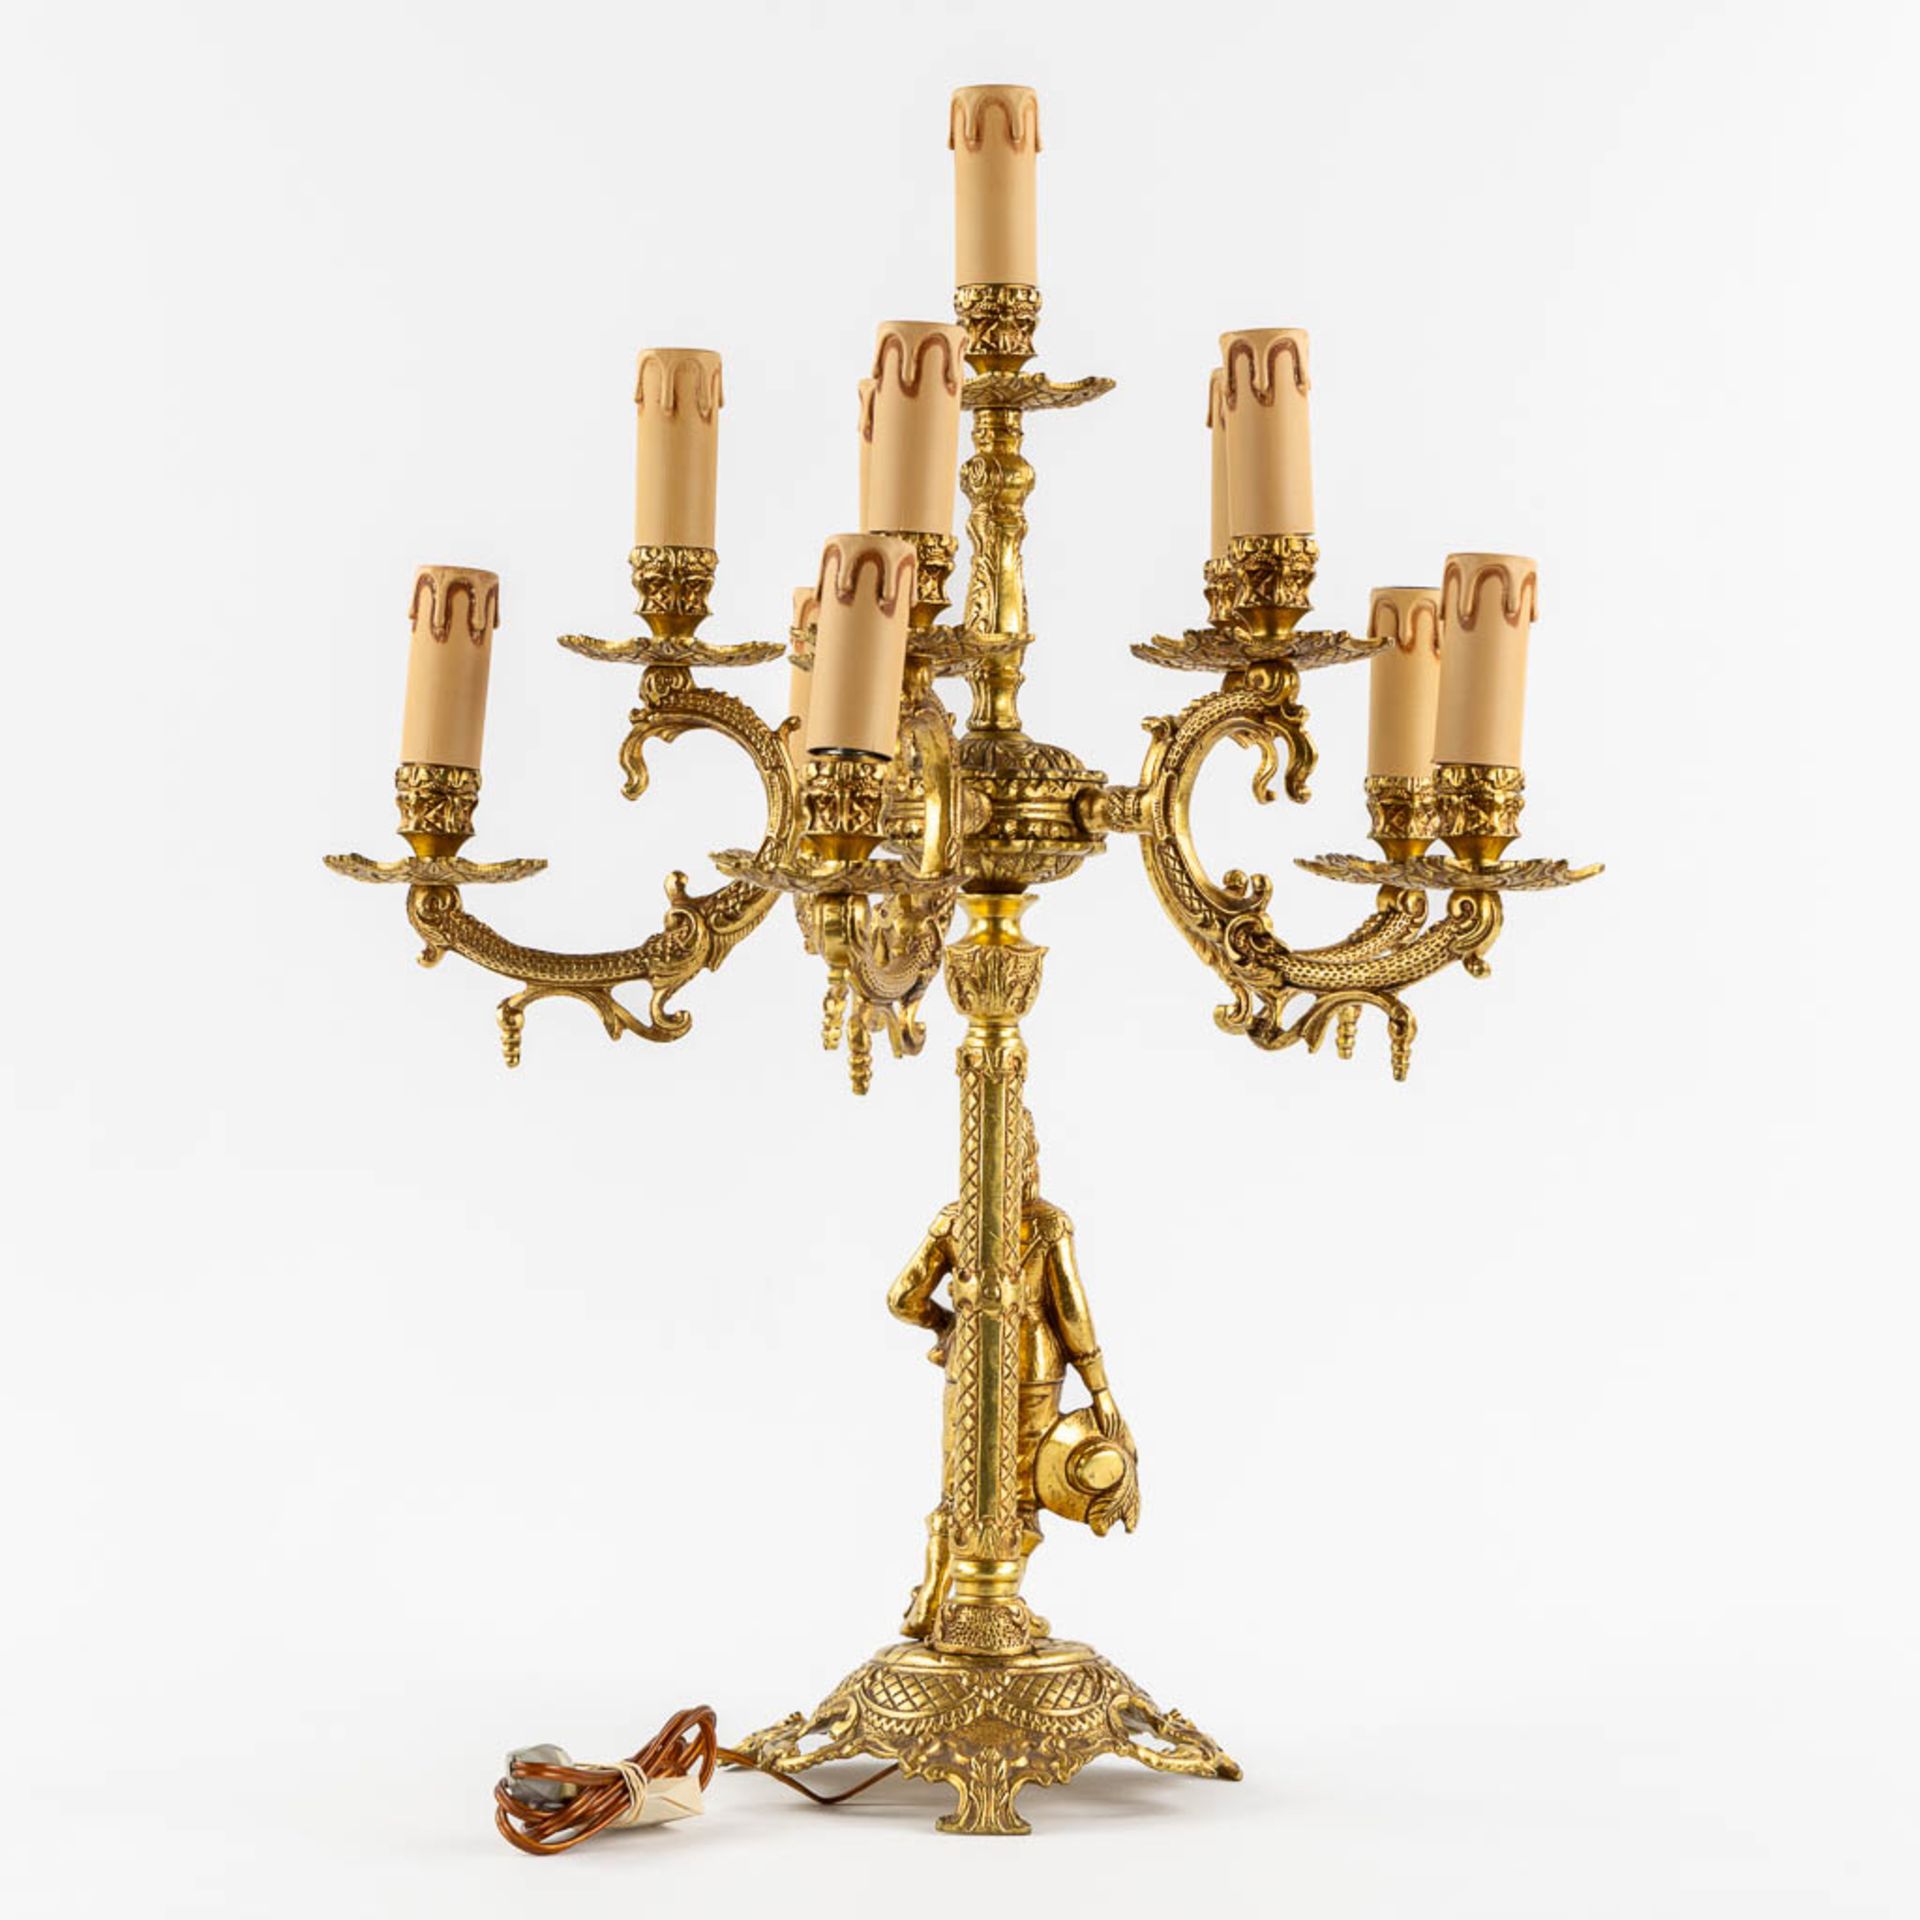 A large and decorative table lamp with a musketeer figurine, gilt bronze. 20th C. (H:61 x D:46 cm) - Bild 4 aus 11